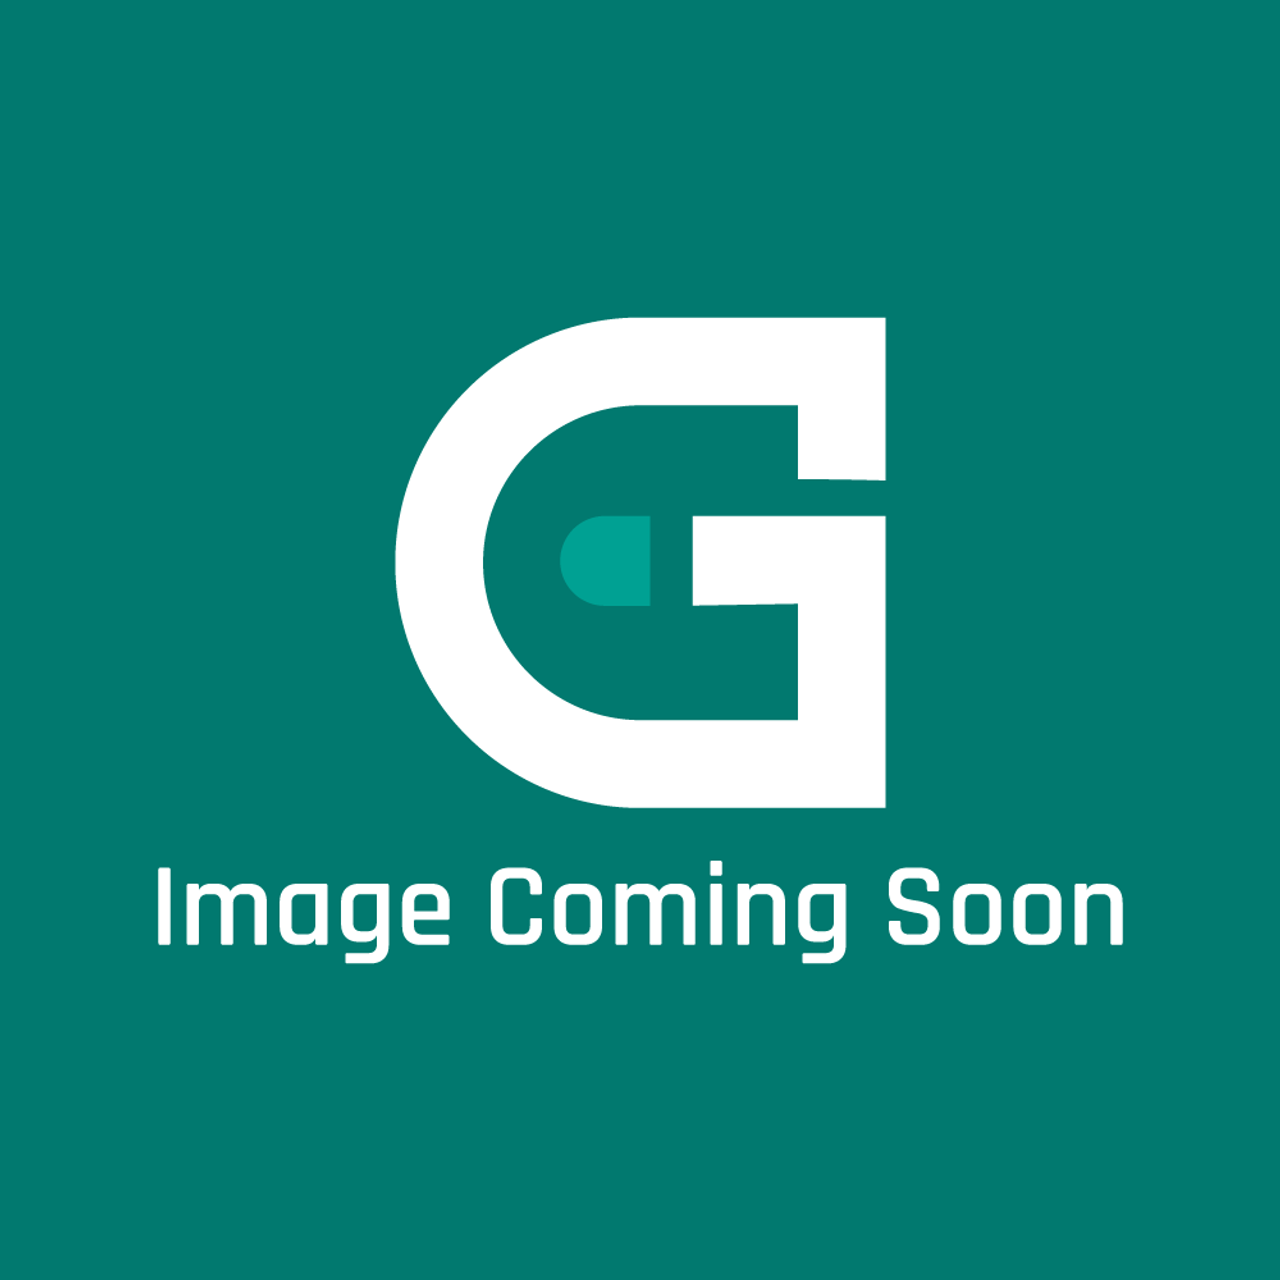 Frigidaire - Electrolux 316406403 Glass - Image Coming Soon!